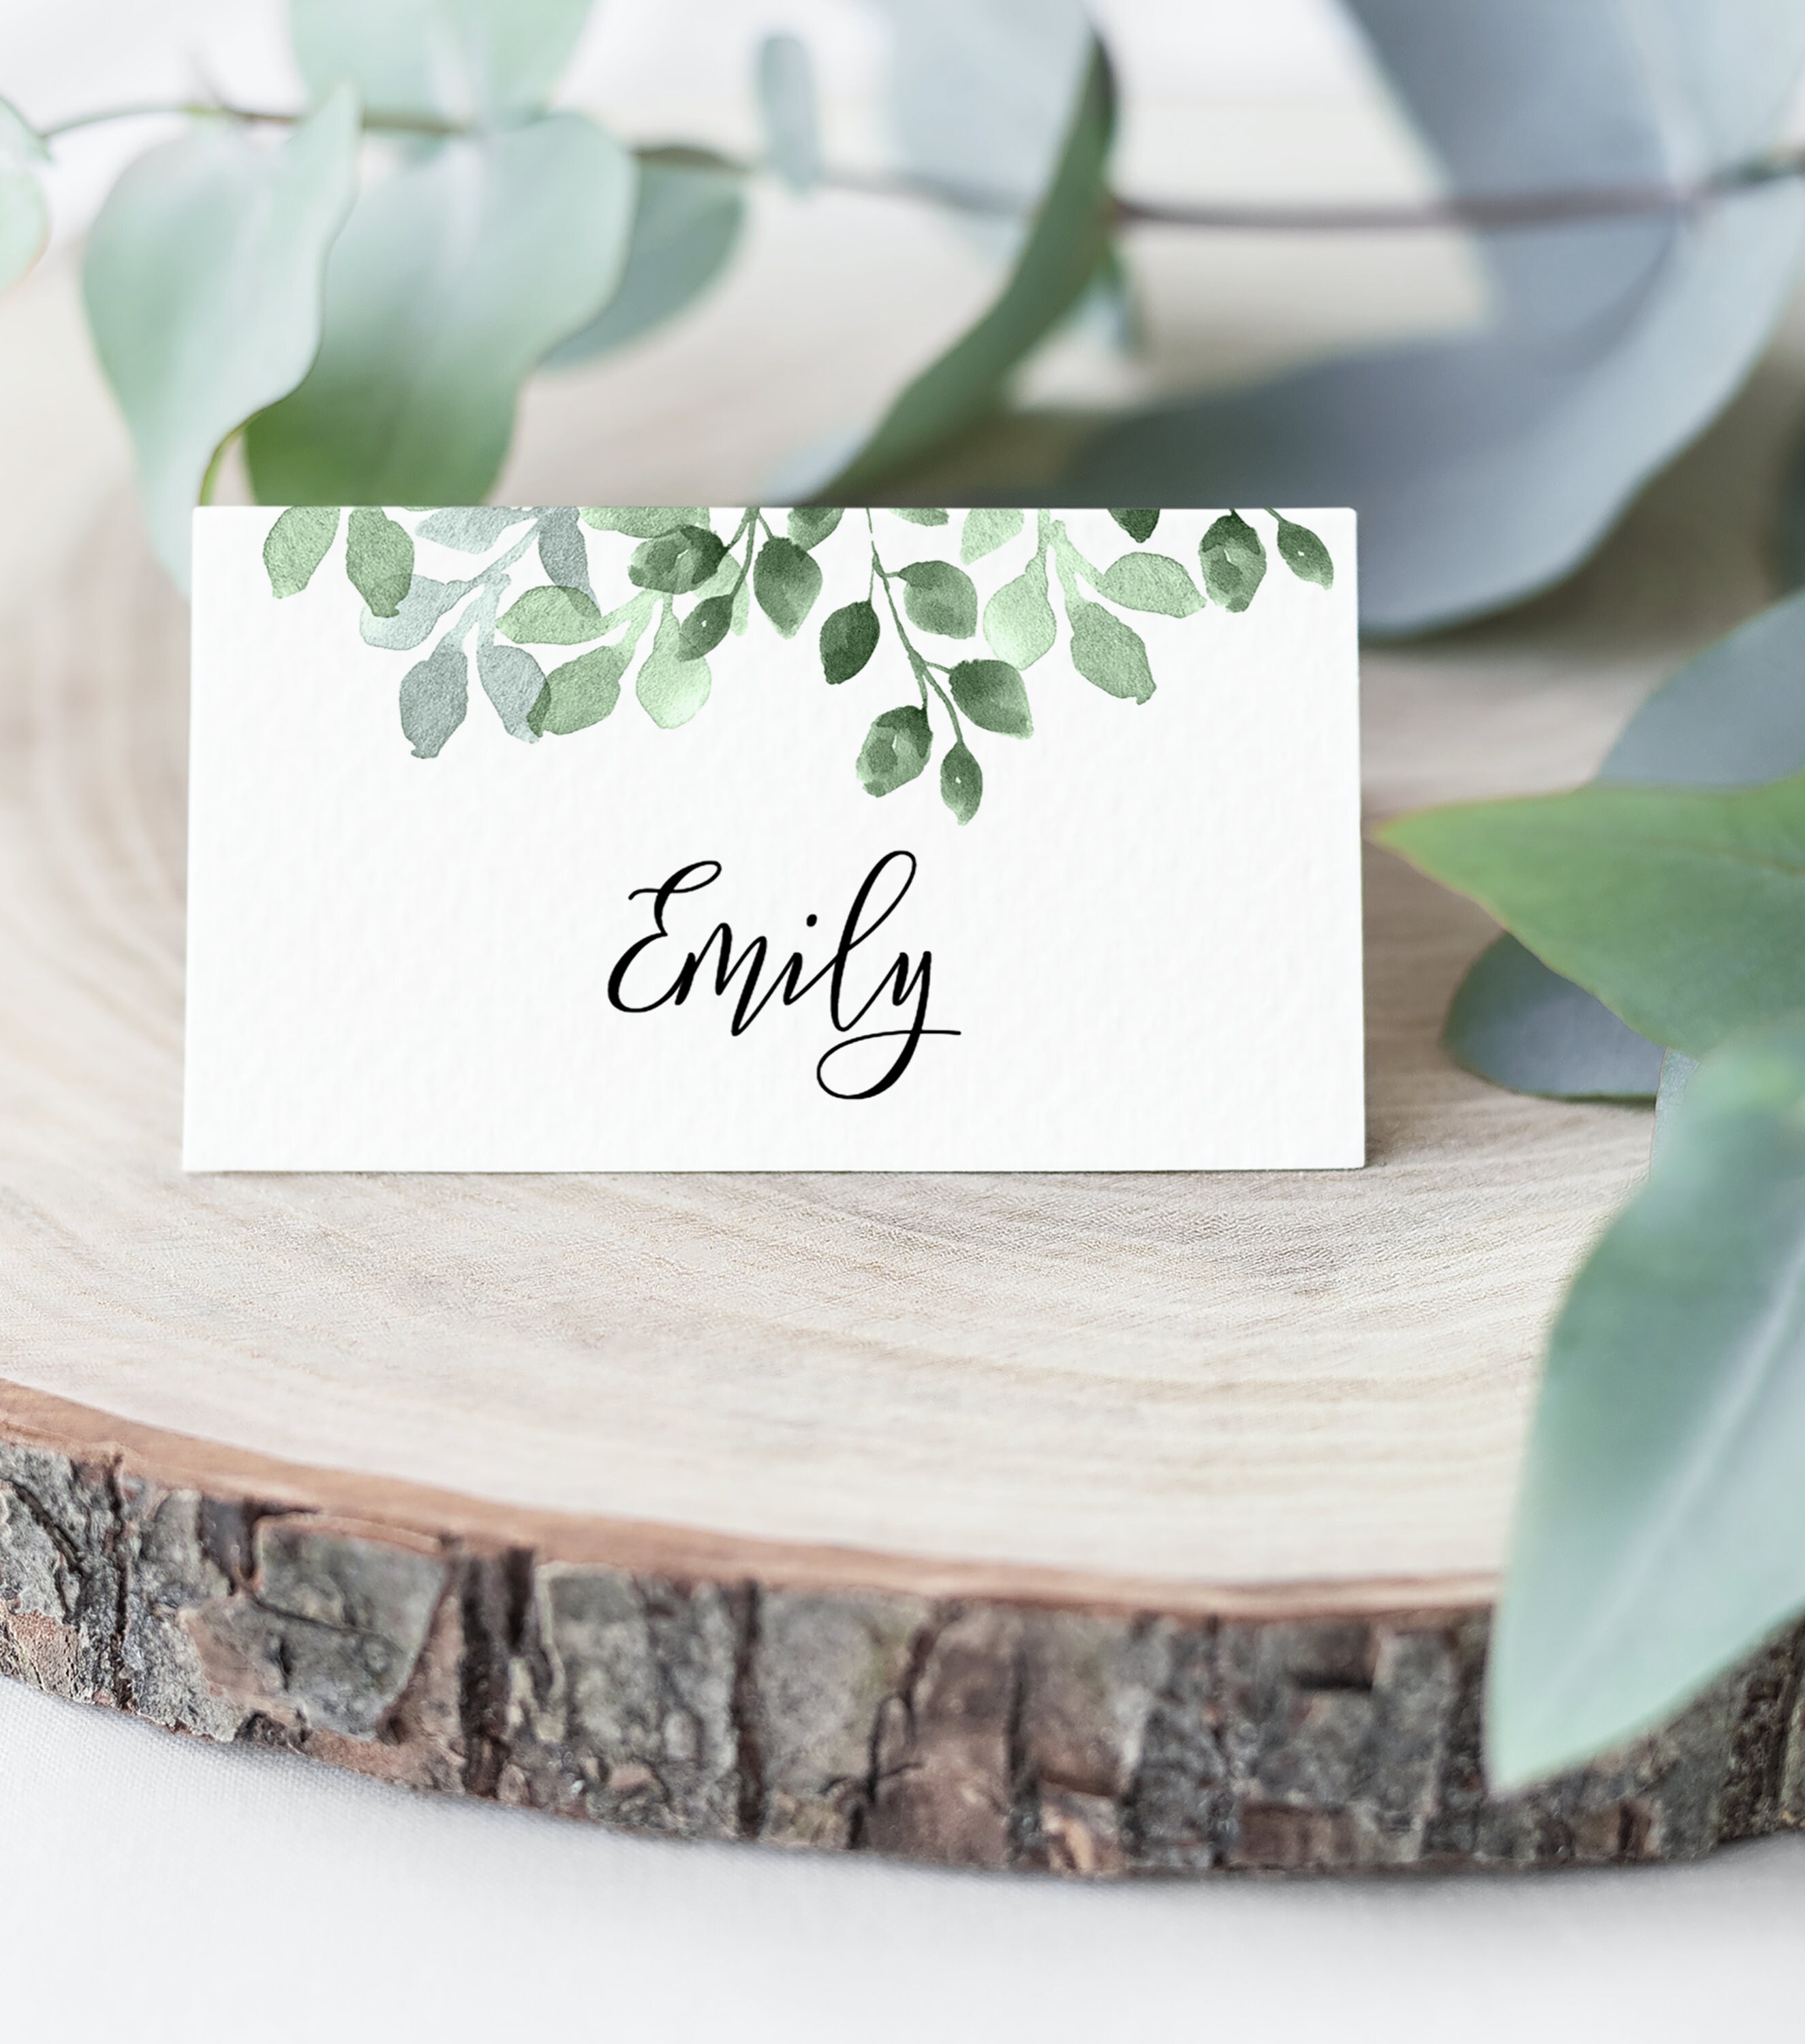 Wedding Place Cards Wedding Name Cards Editable Template Instant Download  Eucalyptus Printable Place Cards Table Card Greenery, G20 Pertaining To Table Name Cards Template Free